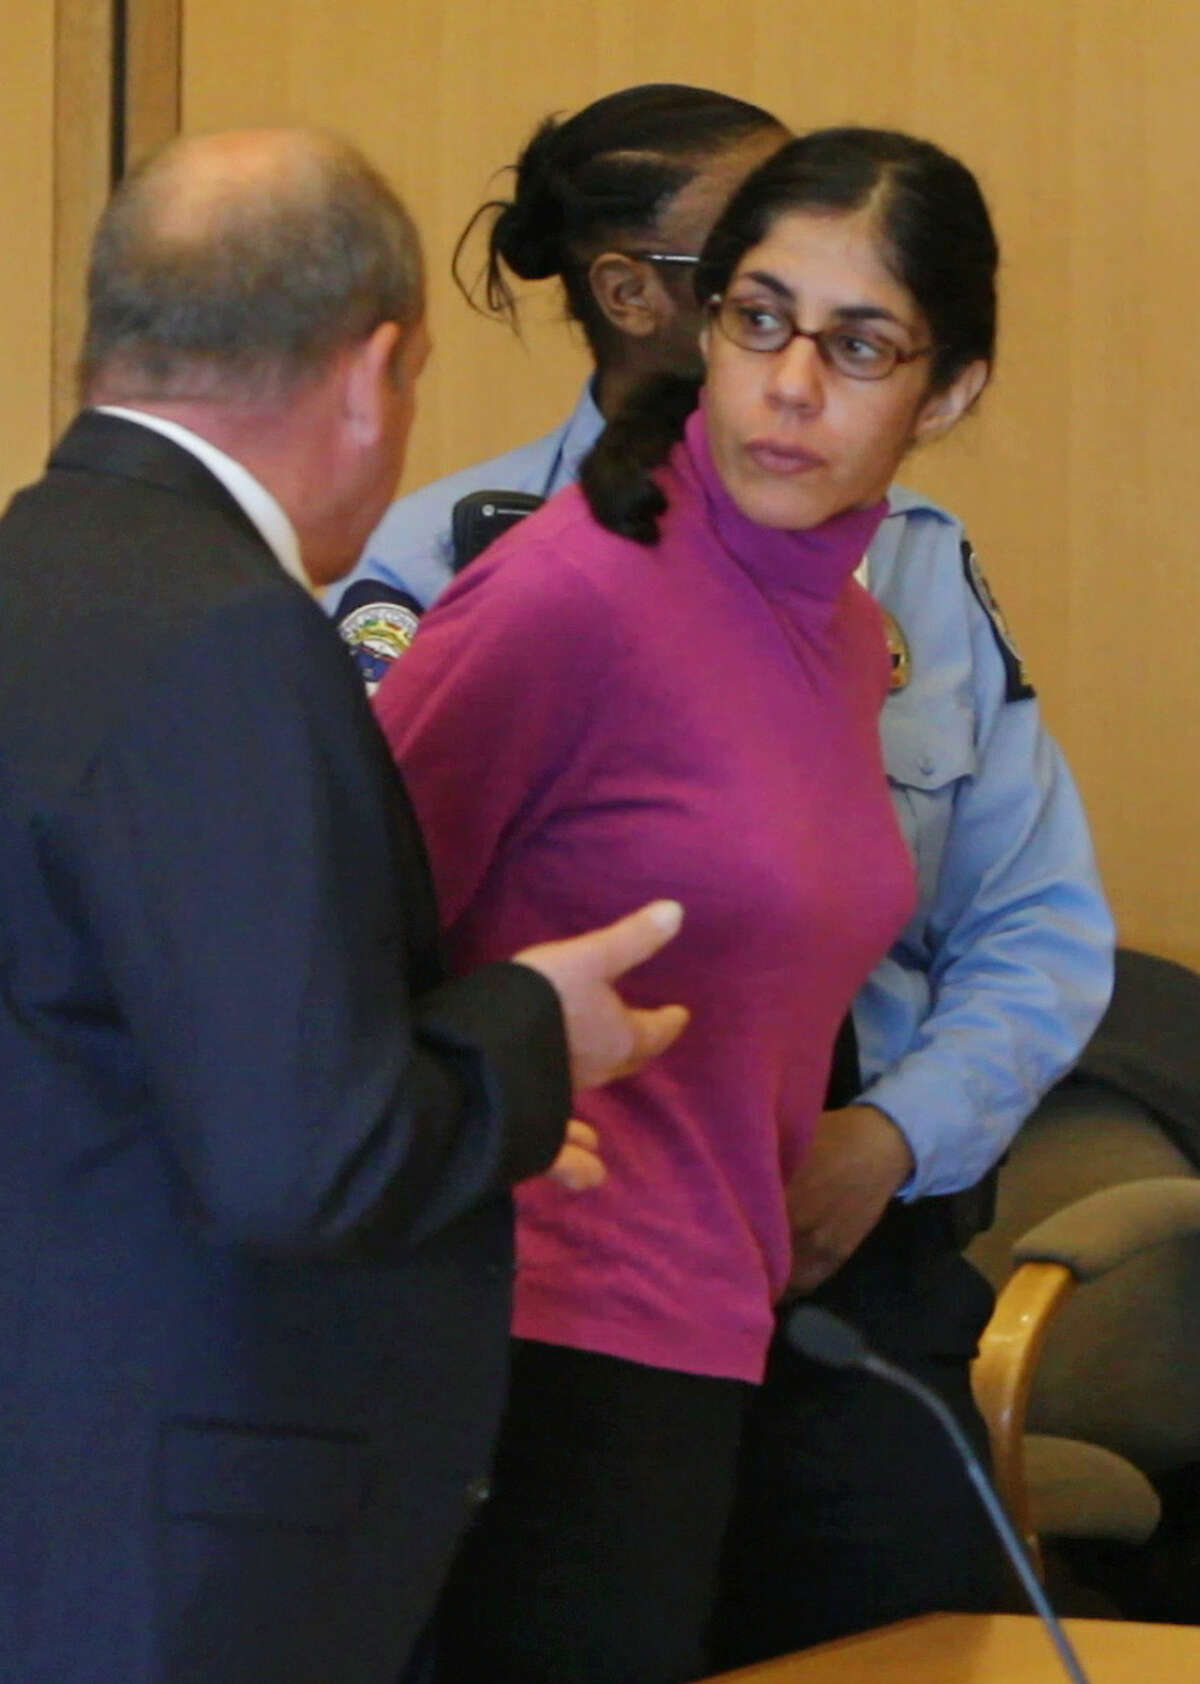 Sheila Davalloo looks back at the court room following her sentencing for the murdering Anna Lisa Raymundo, at Superior Court in Stamford Conn., Friday, April 27, 2012. At left is Barry Butler, Chief Public Defender for the Stamford Norwalk Judicial Courts and Davalloo’s court appointed legal aide. (AP Photo/The Journal News, Matthew Brown, Pool)